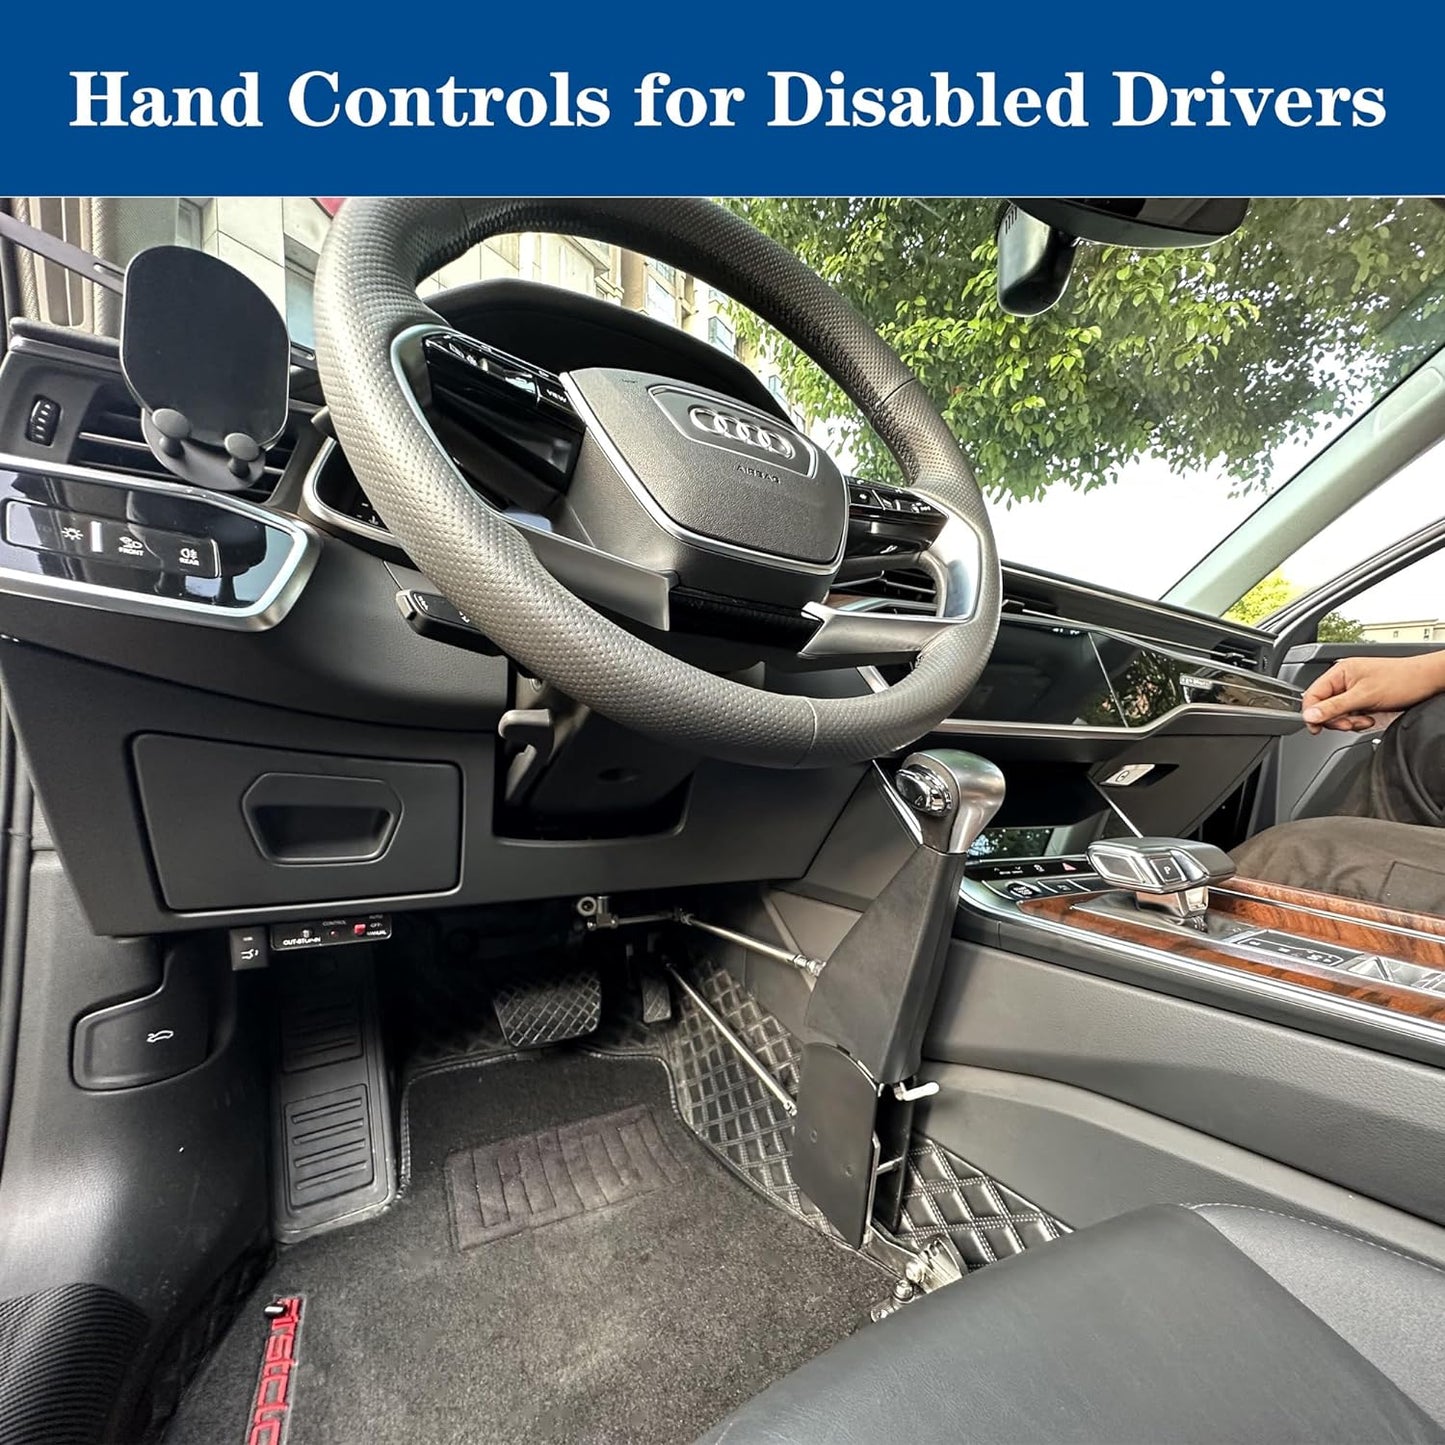 Hand Controls for Disabled Drivers, Handicap Driving Hand Controls Adjustable Aid Equipment, Car Handicap Vehicle Hand Controls/Brake Pedals Assist High-end Device Kit with Steering Wheel Spinners